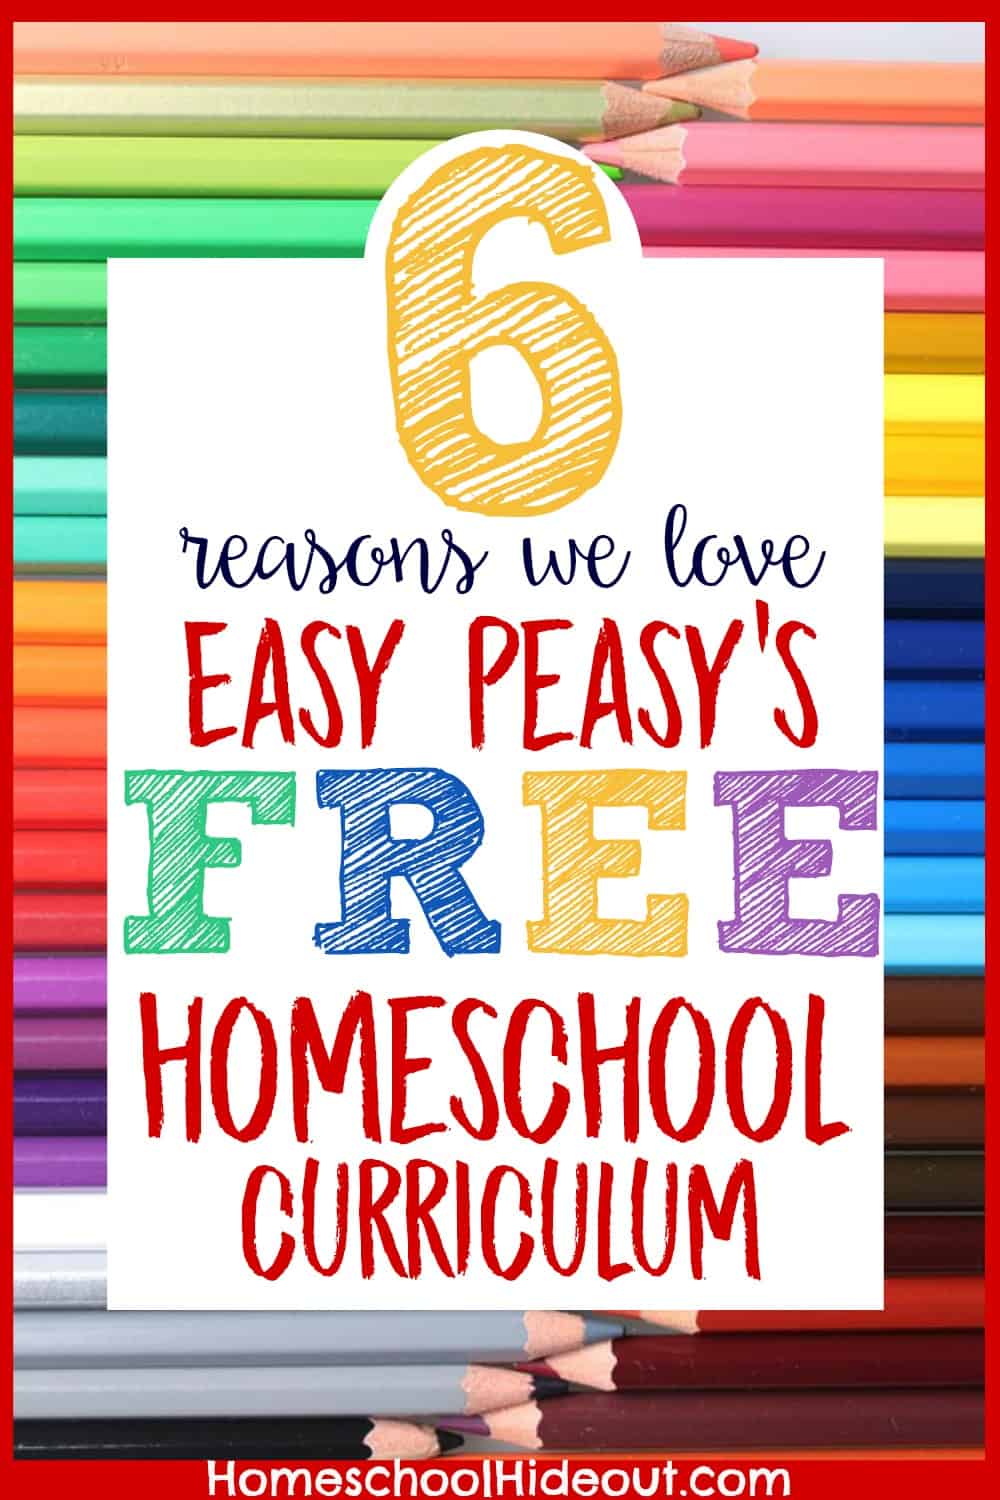 There's a free homeschool curriculum??? How did I not know about this? It covers EVERY SINGLE subject. Perfect for filling in the gaps. Or using as your main curriculum. SCORE!